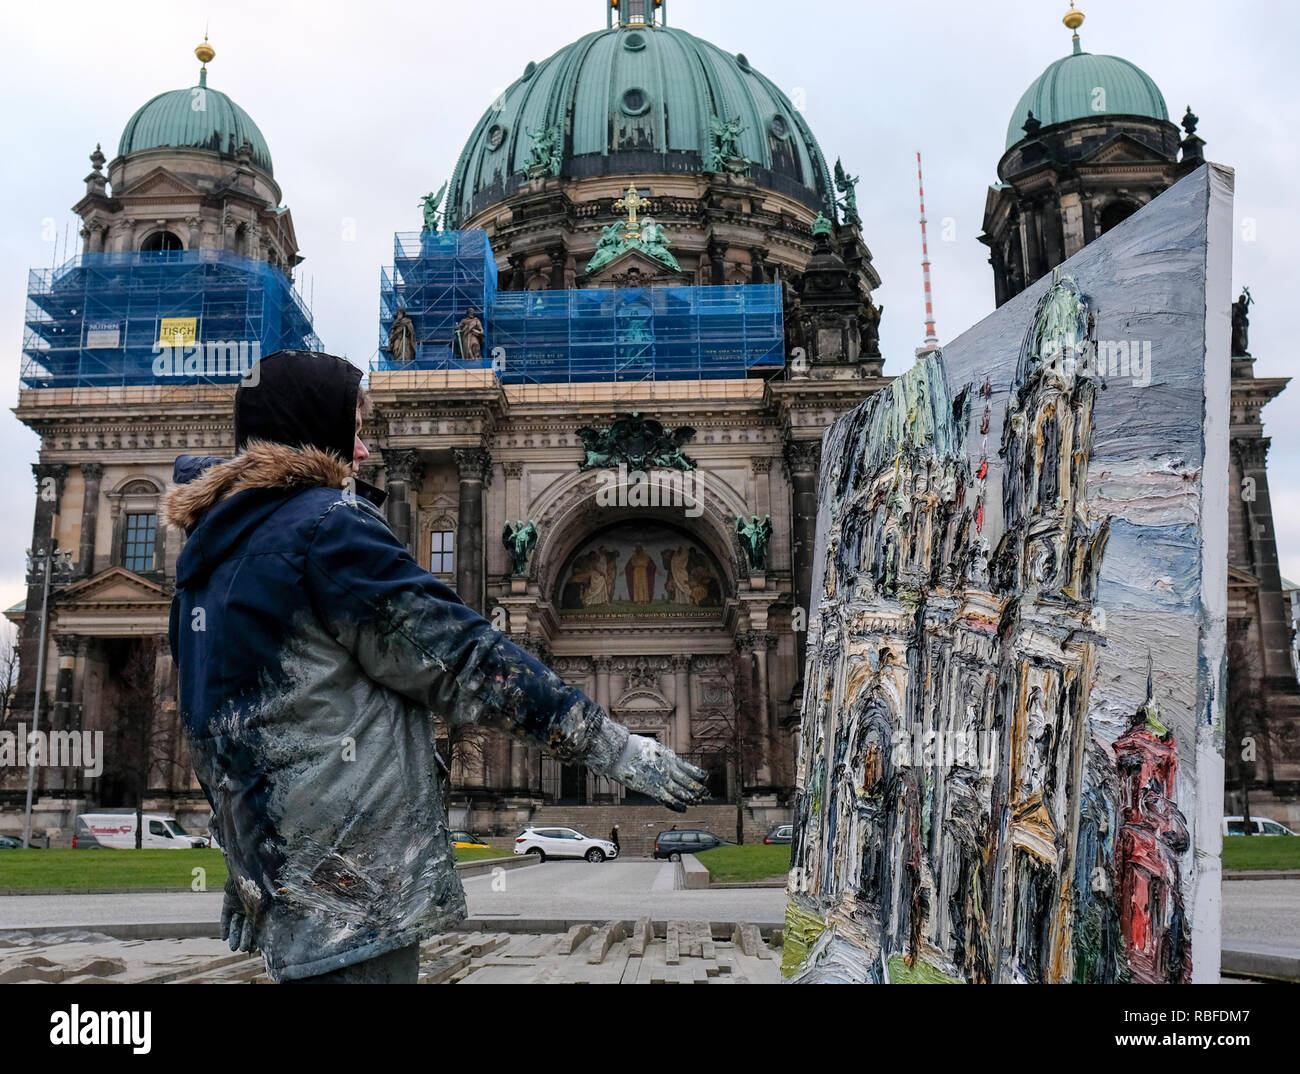 10 January 2019, Berlin: The painter Christopher Lehmpfuhl paints a picture with the Berlin Cathedral in the Lustgarten. The artist is known for painting large-format, color-intensive pictures in public or outdoors. He uses his fingers to apply the paint. Photo: Jens Kalaene/dpa-Zentralbild/ZB Stock Photo